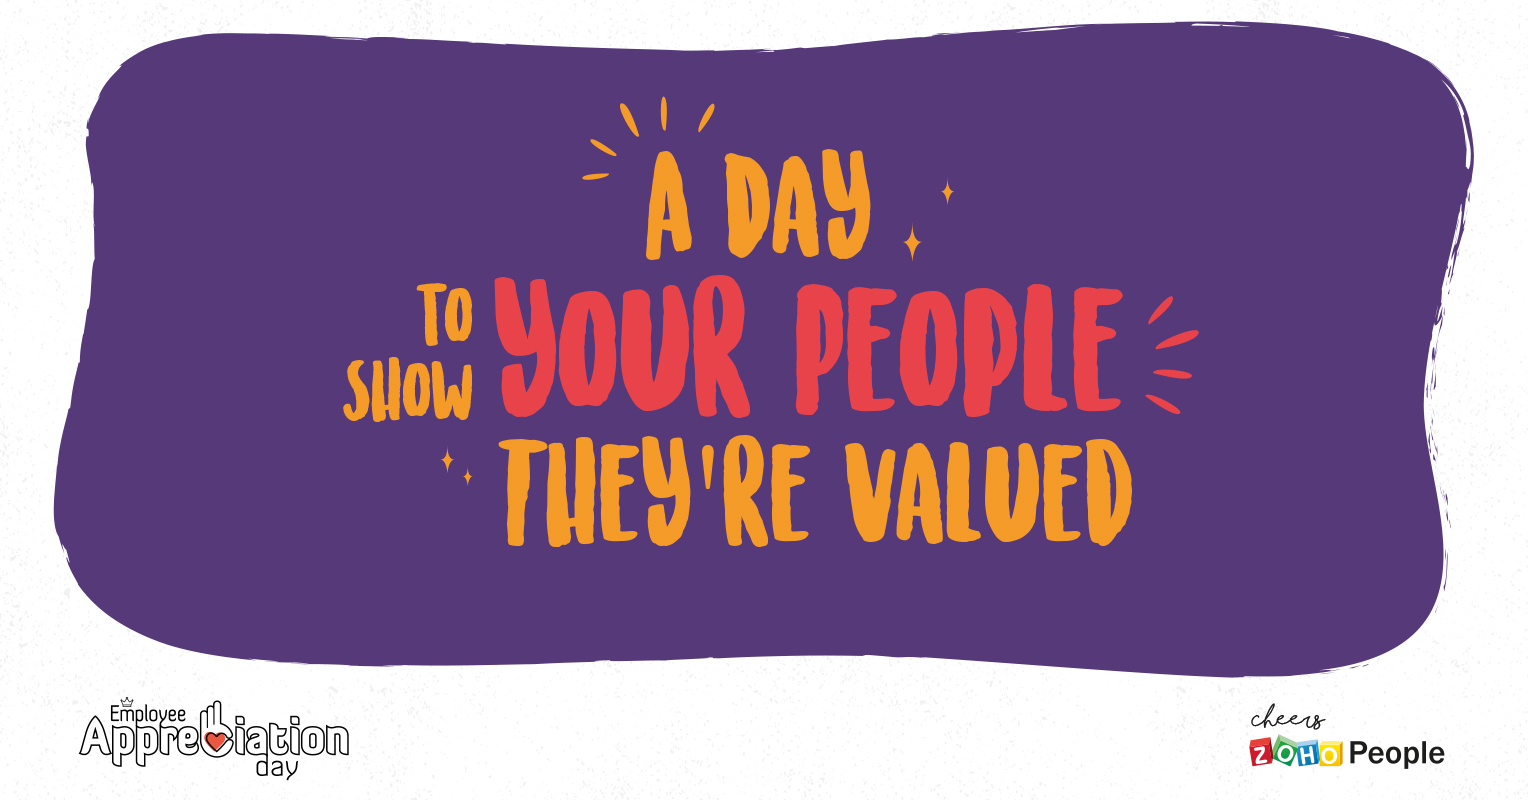 5 Ways to Show Your Employees You Care this Employee Appreciation Day